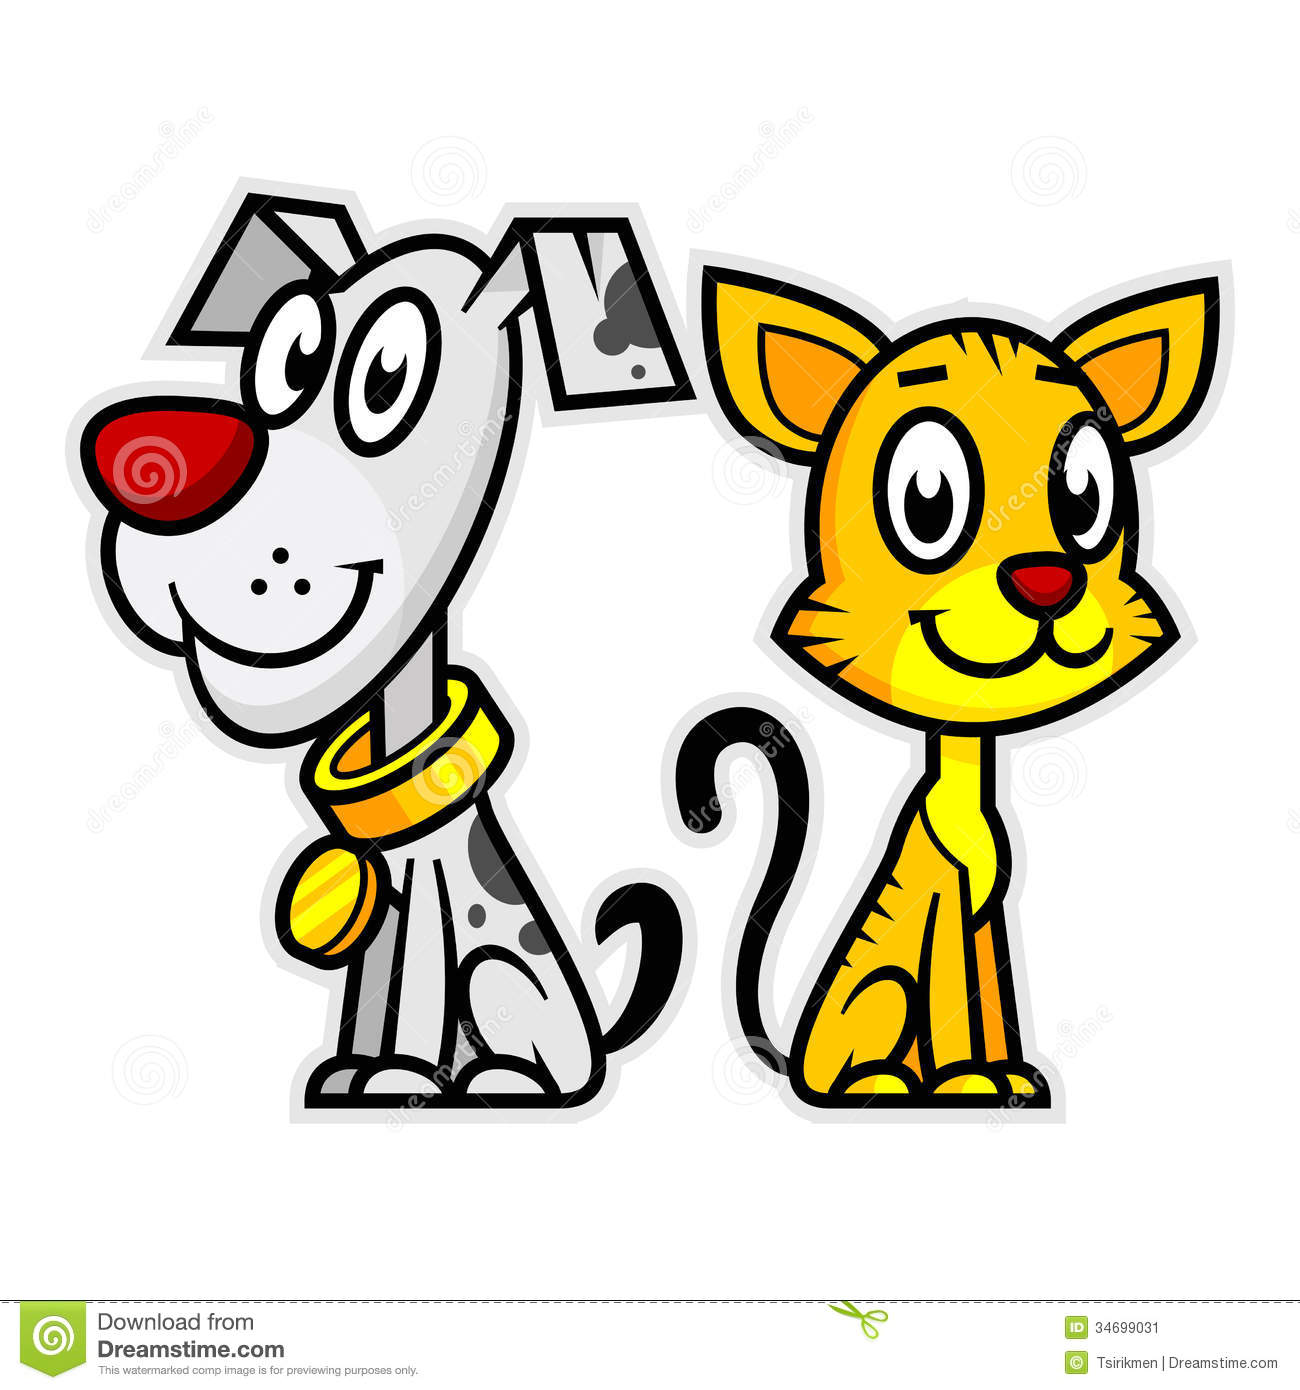 Smiling Dog And Cat Stock Image   Image  34699031